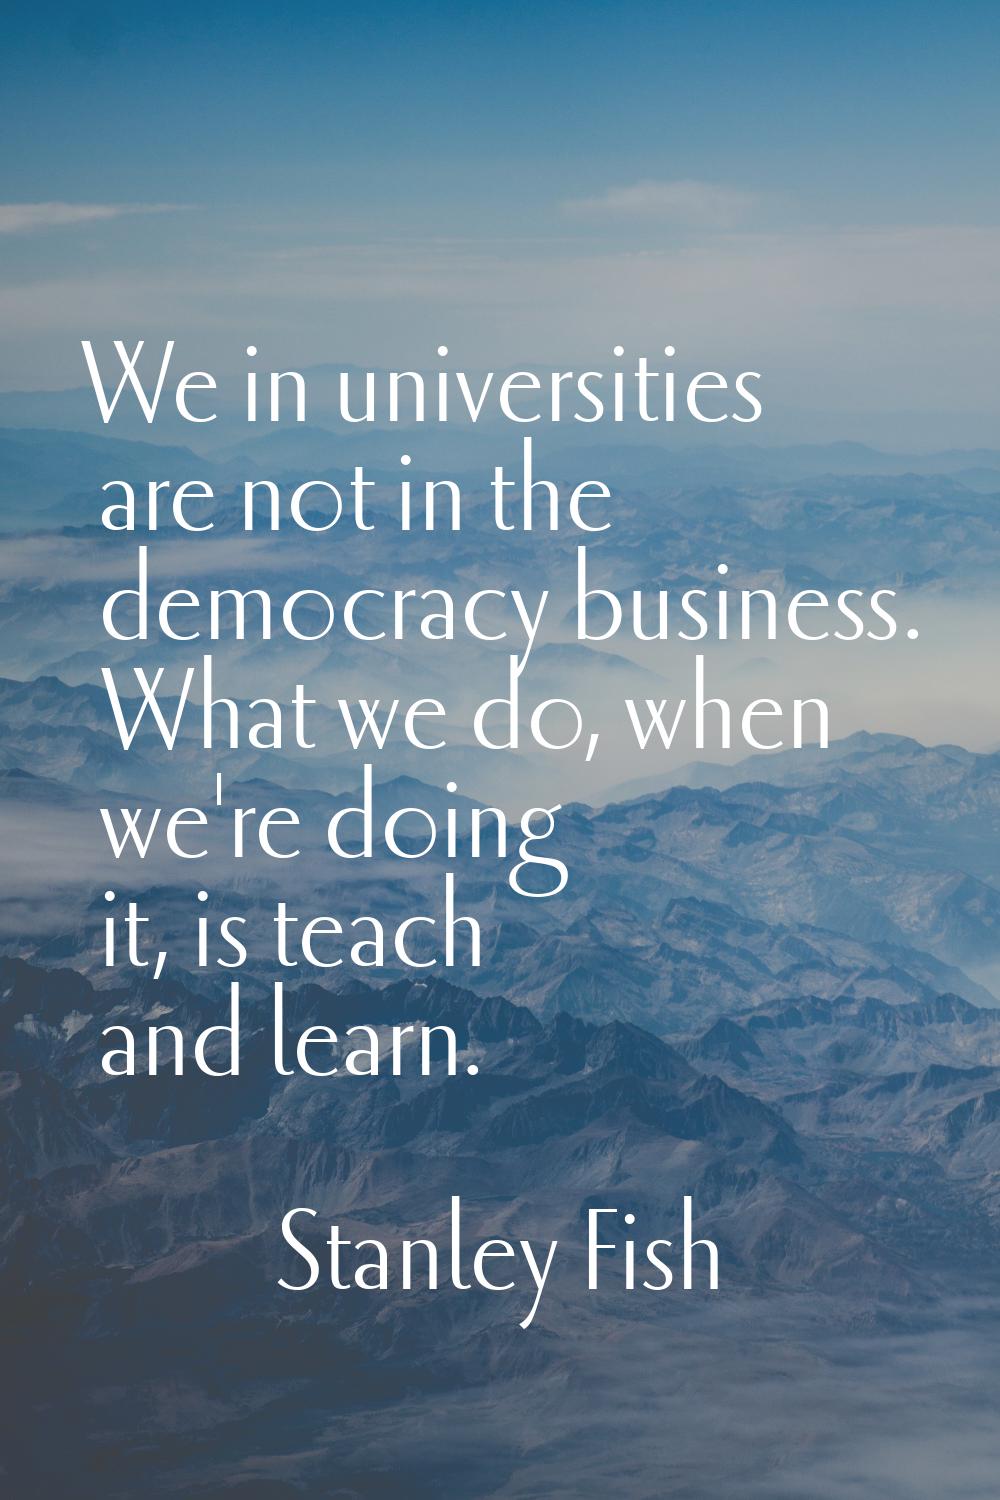 We in universities are not in the democracy business. What we do, when we're doing it, is teach and